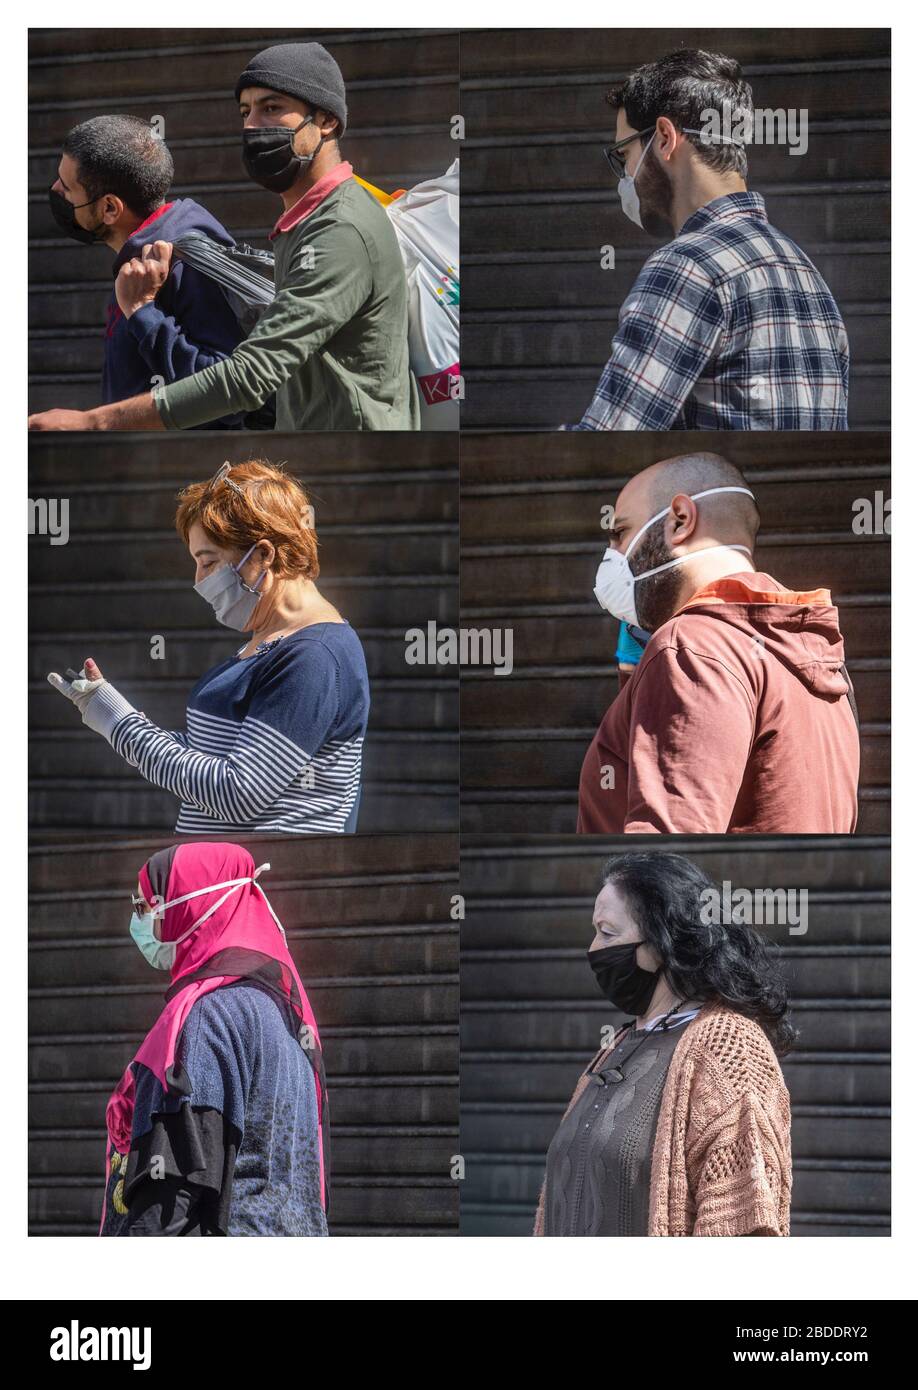 Beirut, Lebanon. 6 April 2020. A Composite image of people in Beirut wearing protective surgical masks against covid-19 infections. Credit: amer ghazzal/Alamy Live News Stock Photo